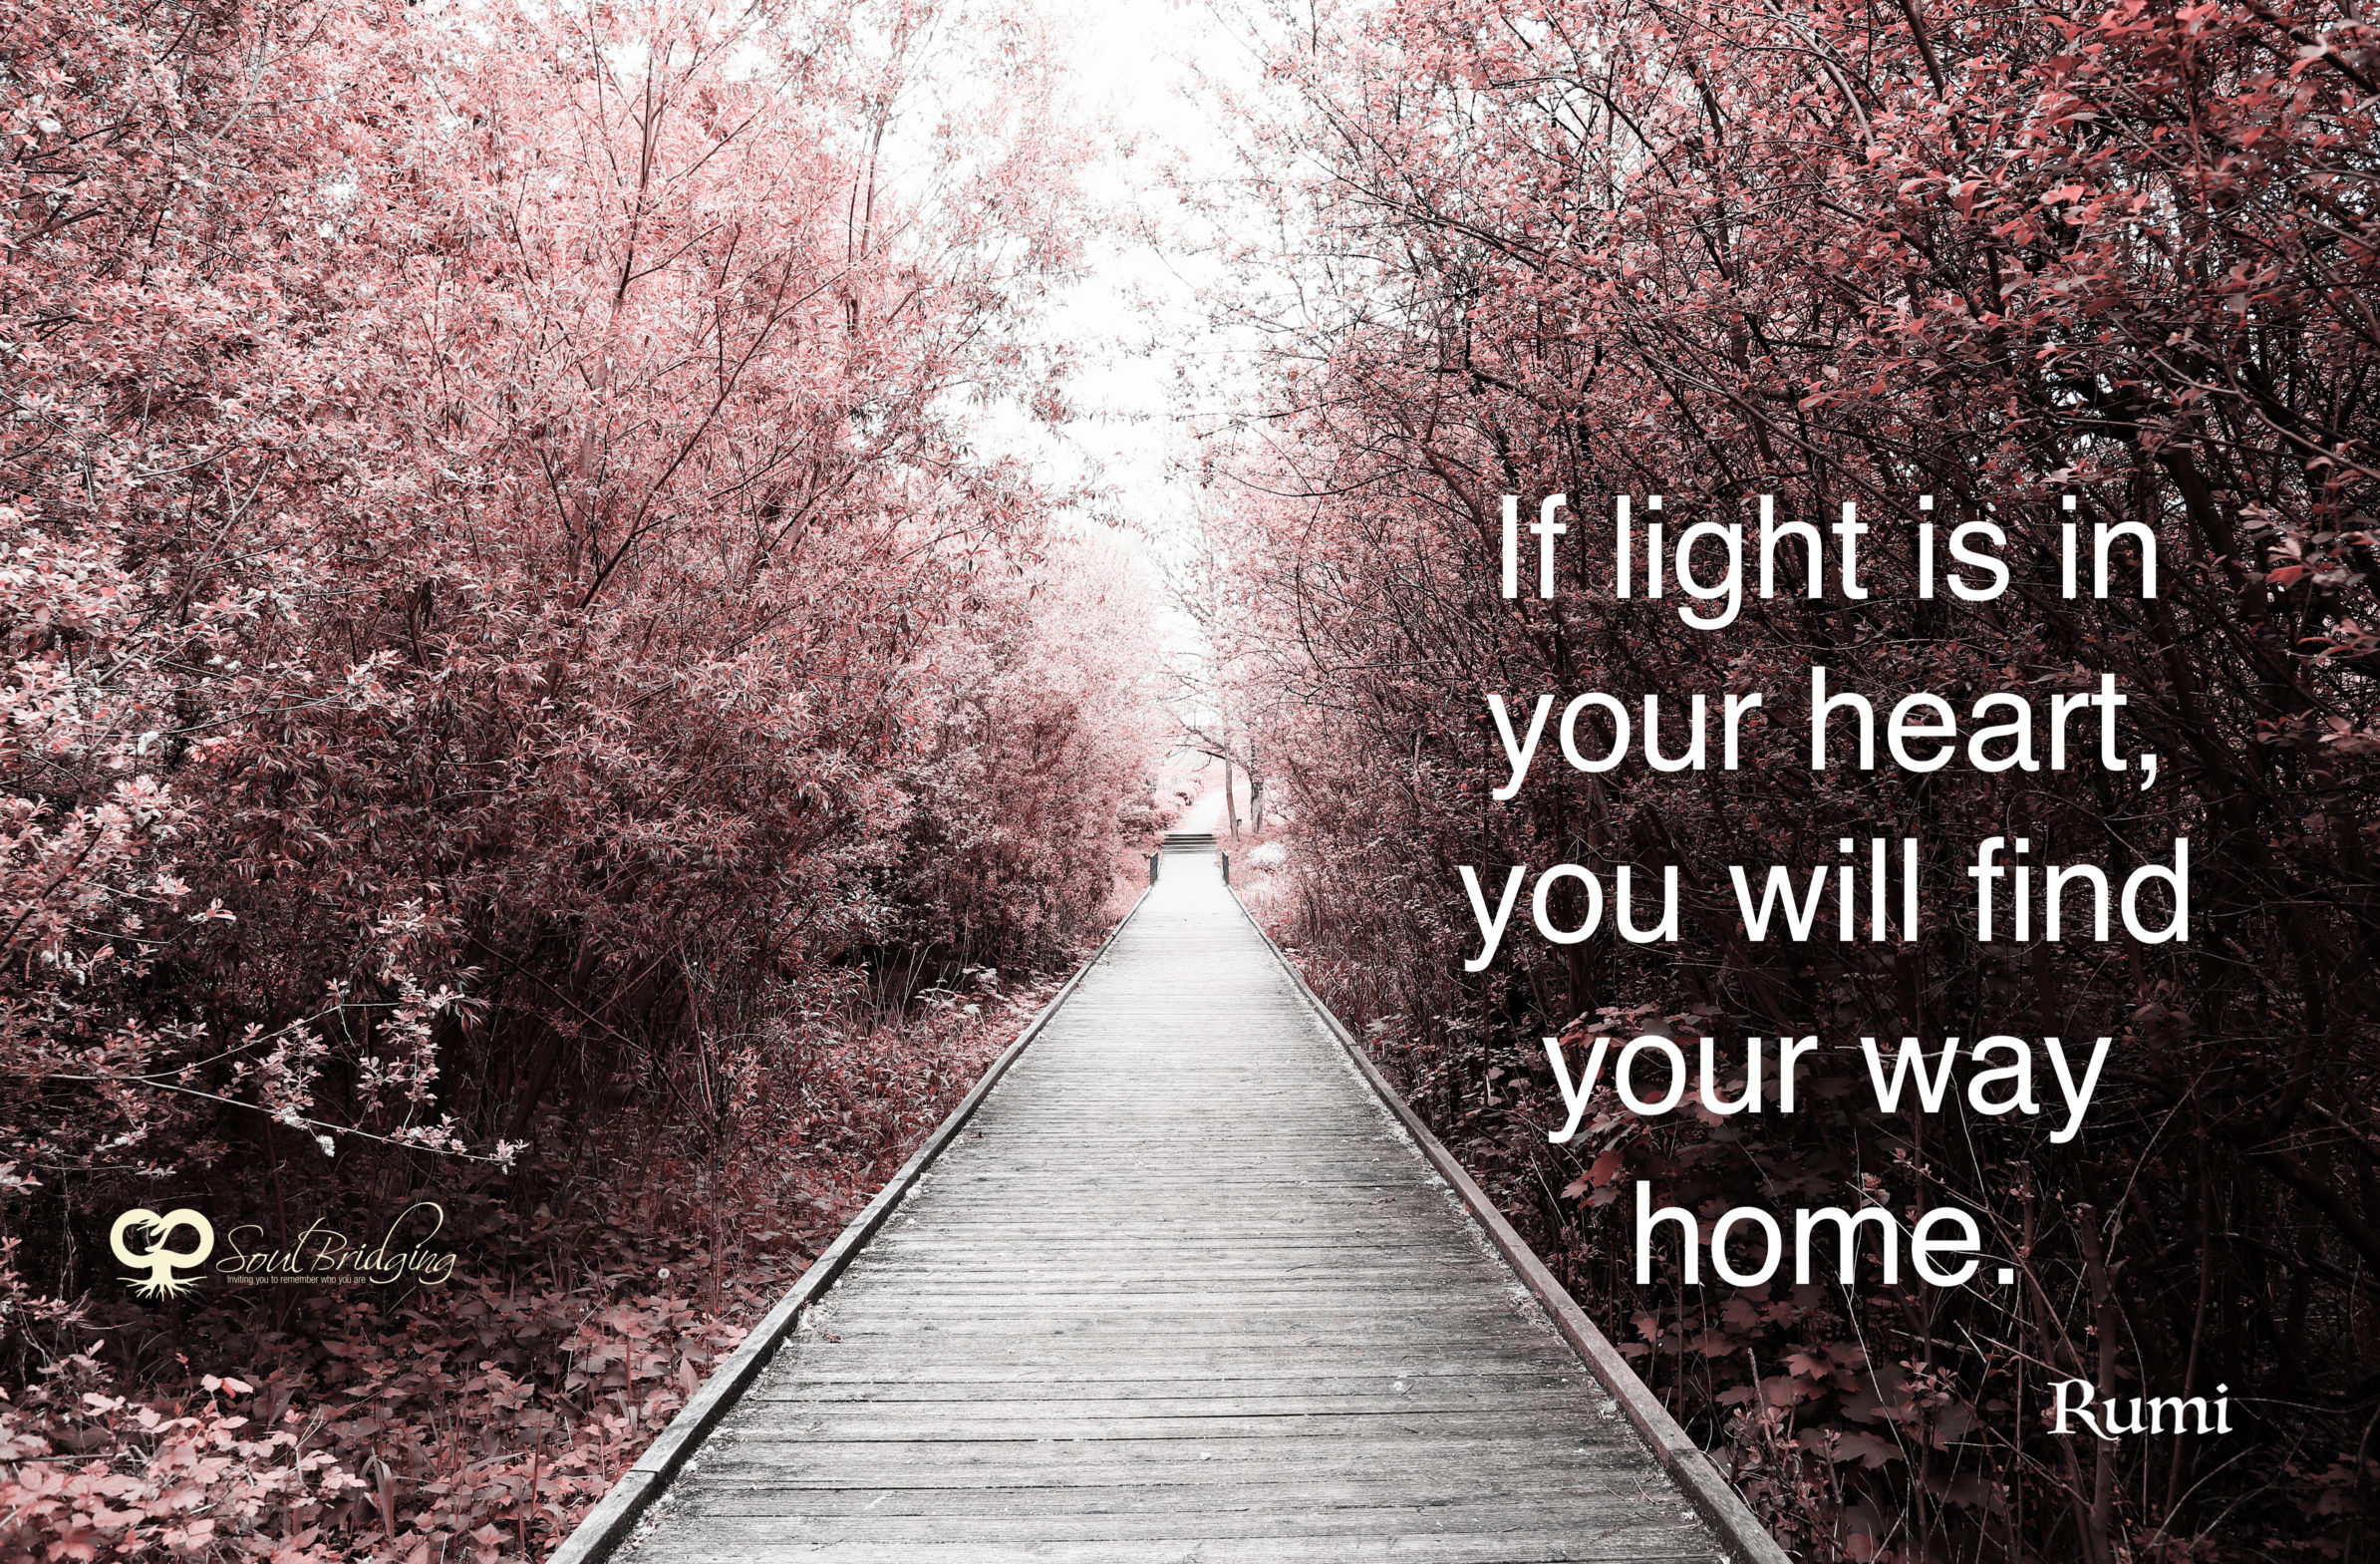 This is your heart. Find your way заставка. Light in Heart. In your Heart. The way Home.